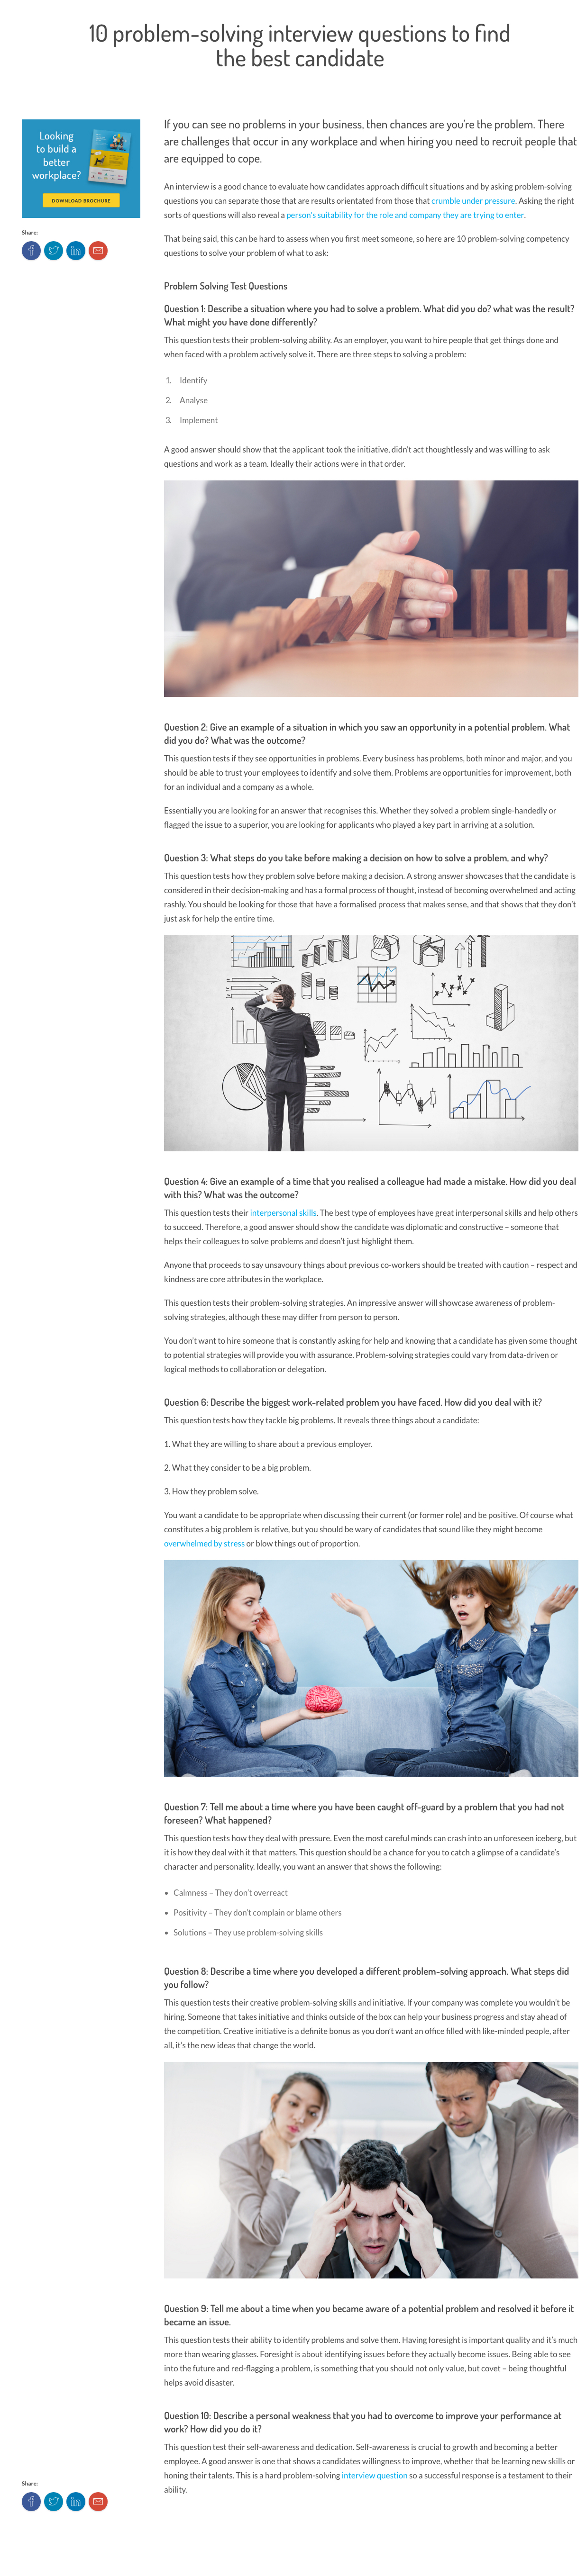 screencapture-perkbox-uk-resources-blog-10-problem-solving-interview-questions-to-find-the-best-candidate-2019-04-02-02_45_37.jpg